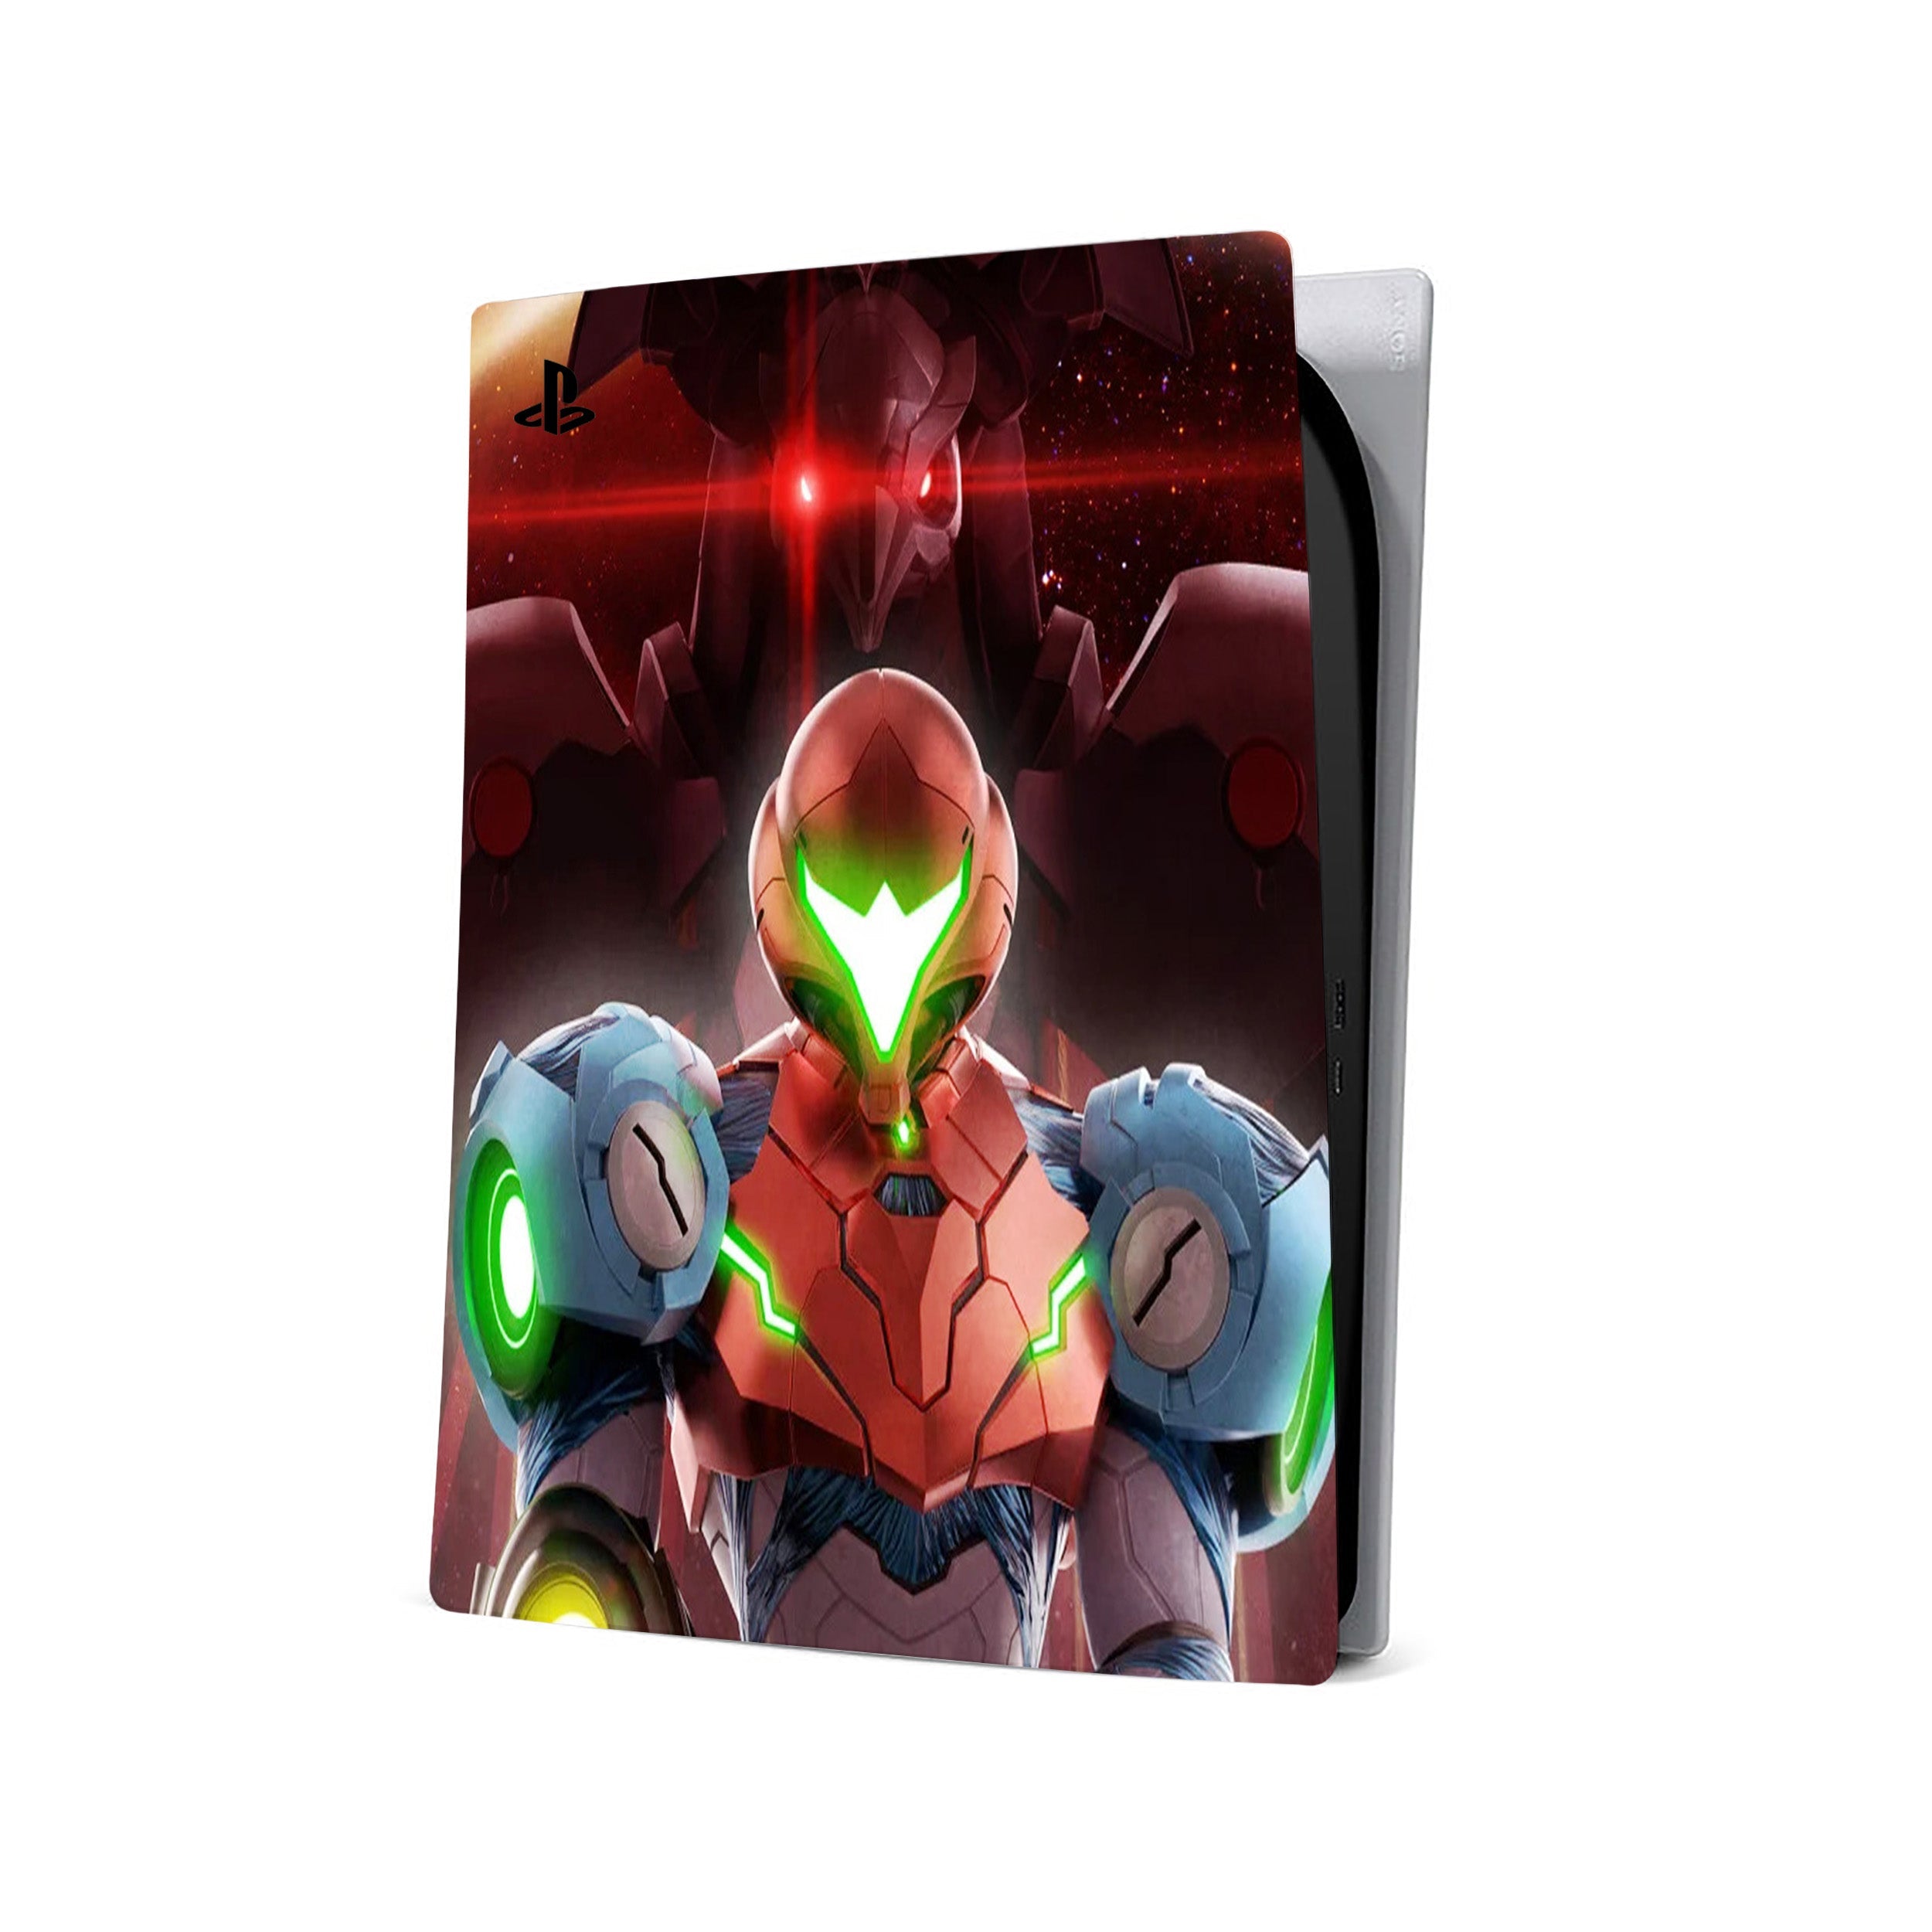 A video game skin featuring a Metroid Dread design for the PS5.